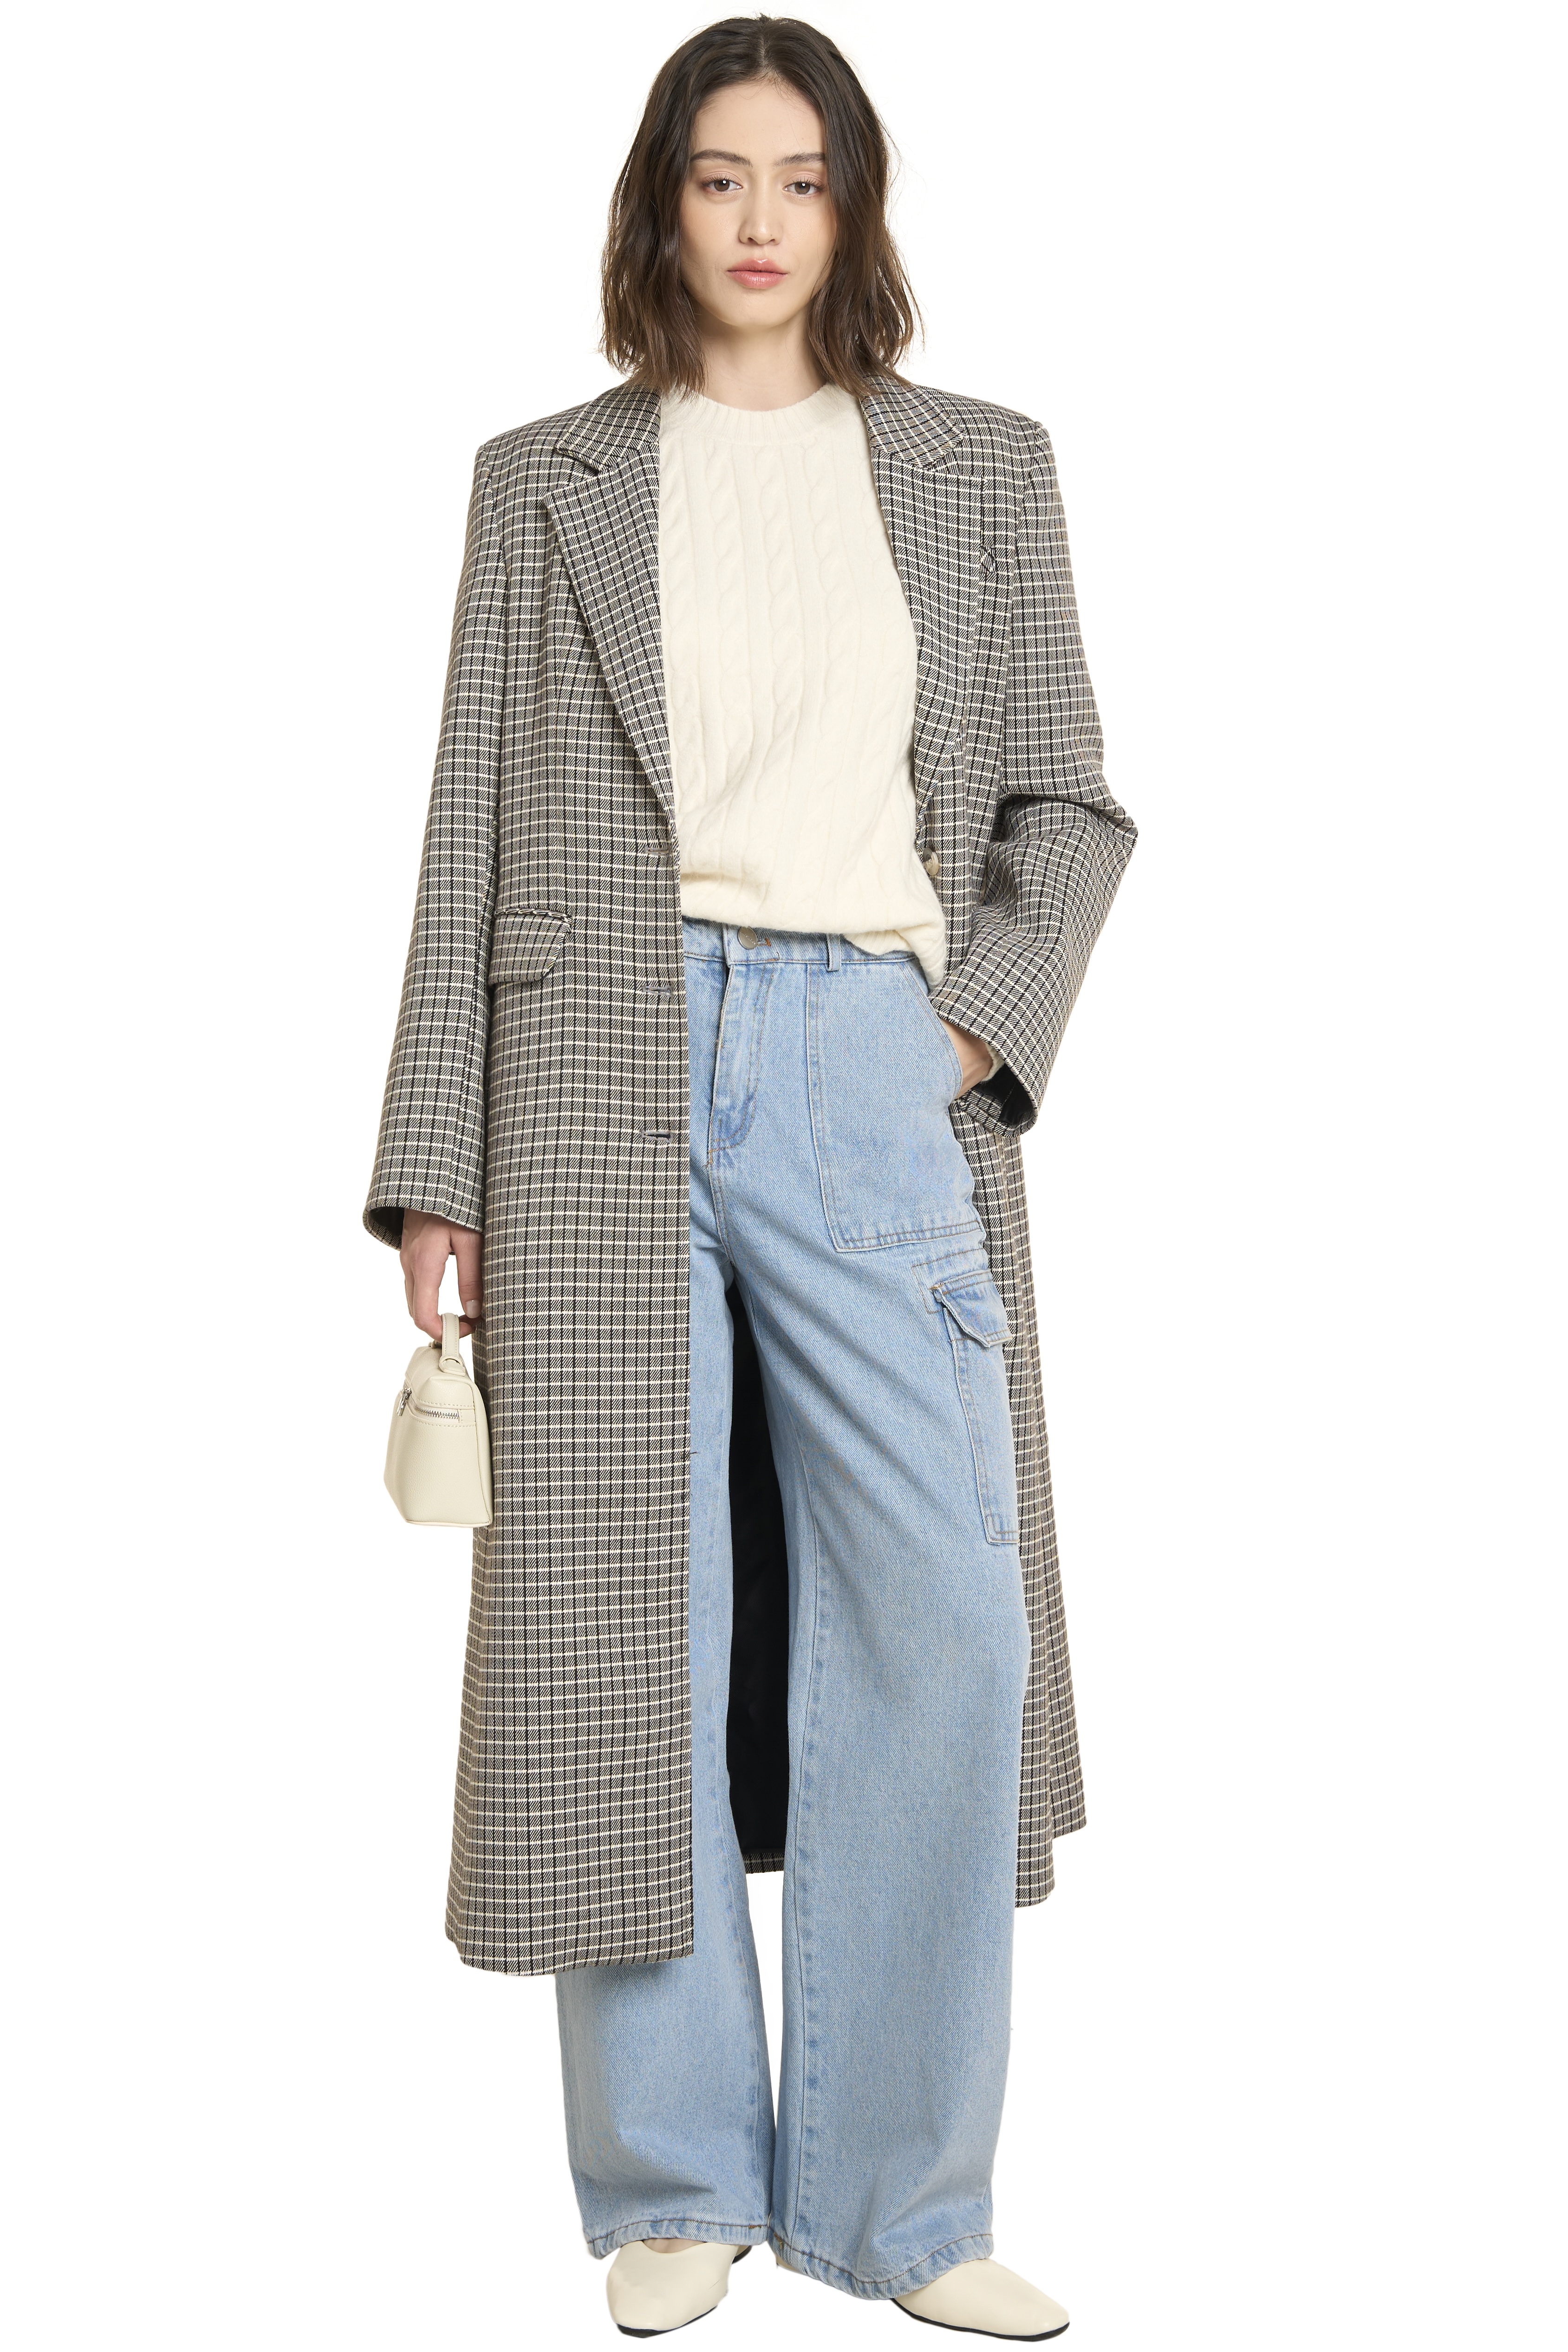 CLERY COAT - BLACK AND OFF WHITE PLAID